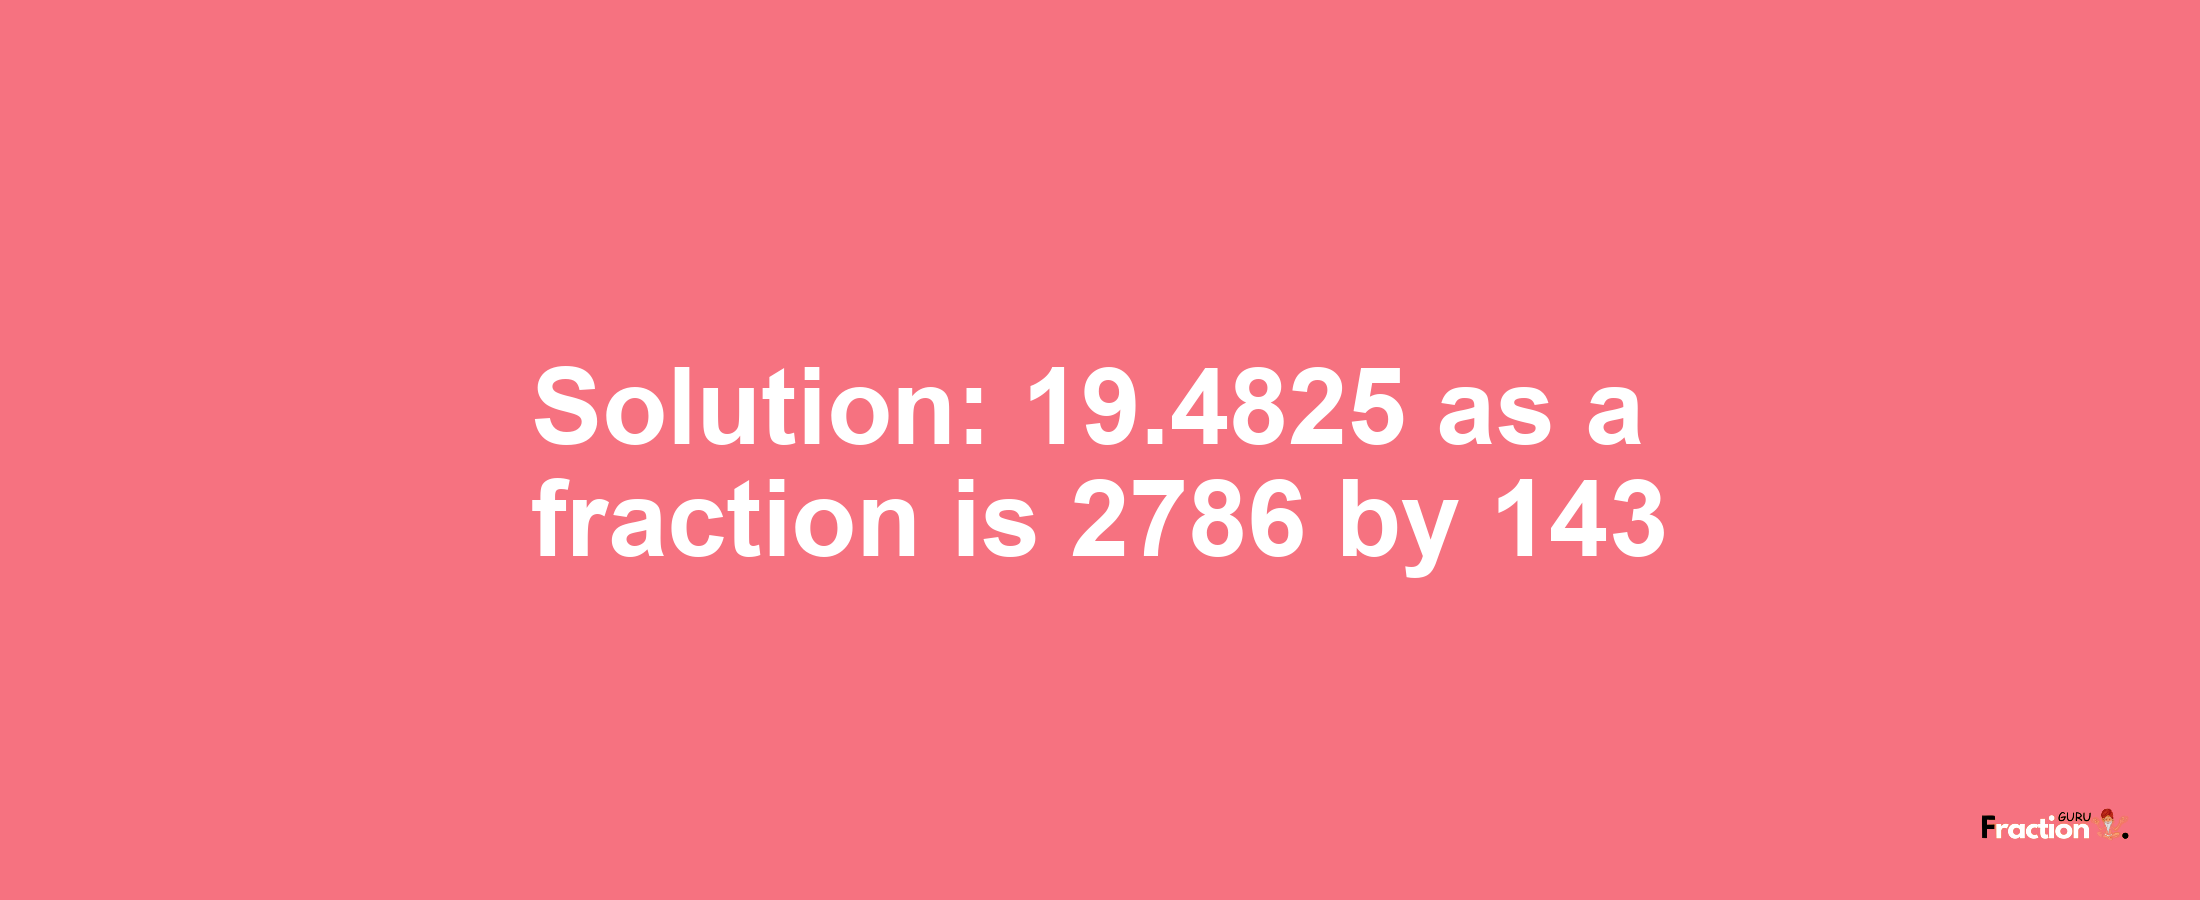 Solution:19.4825 as a fraction is 2786/143